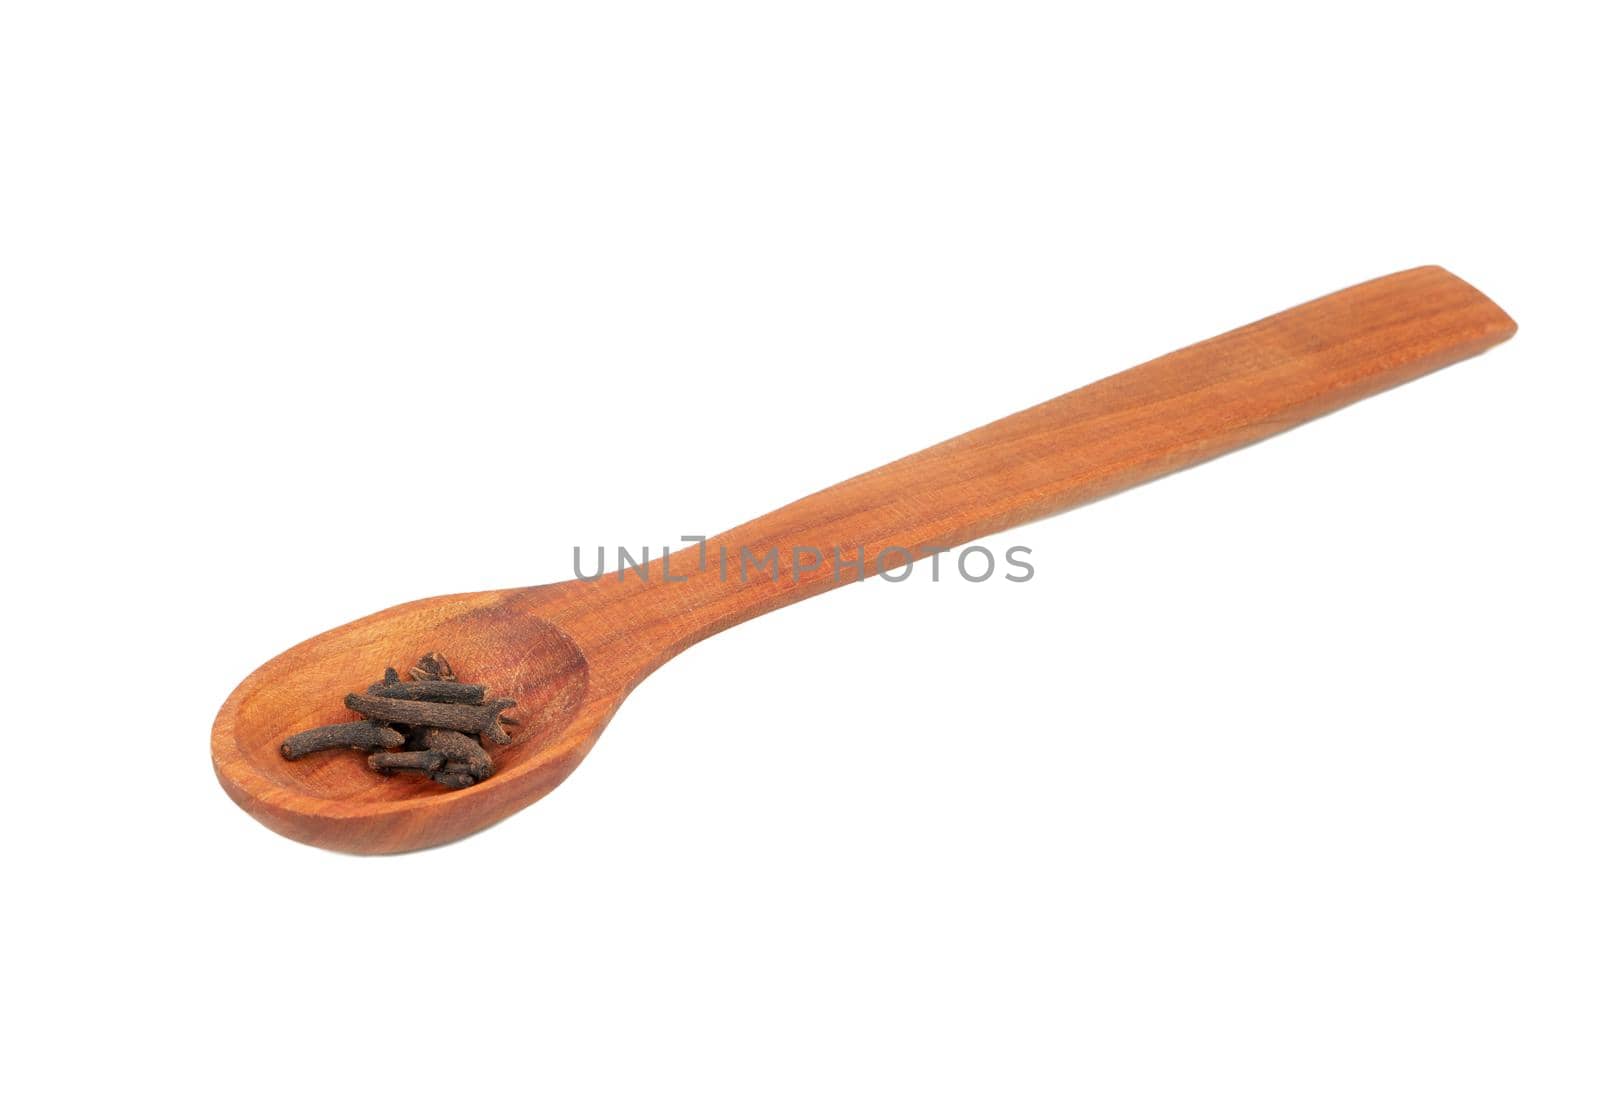 Dry cloves in wooden spoon isolated on white background